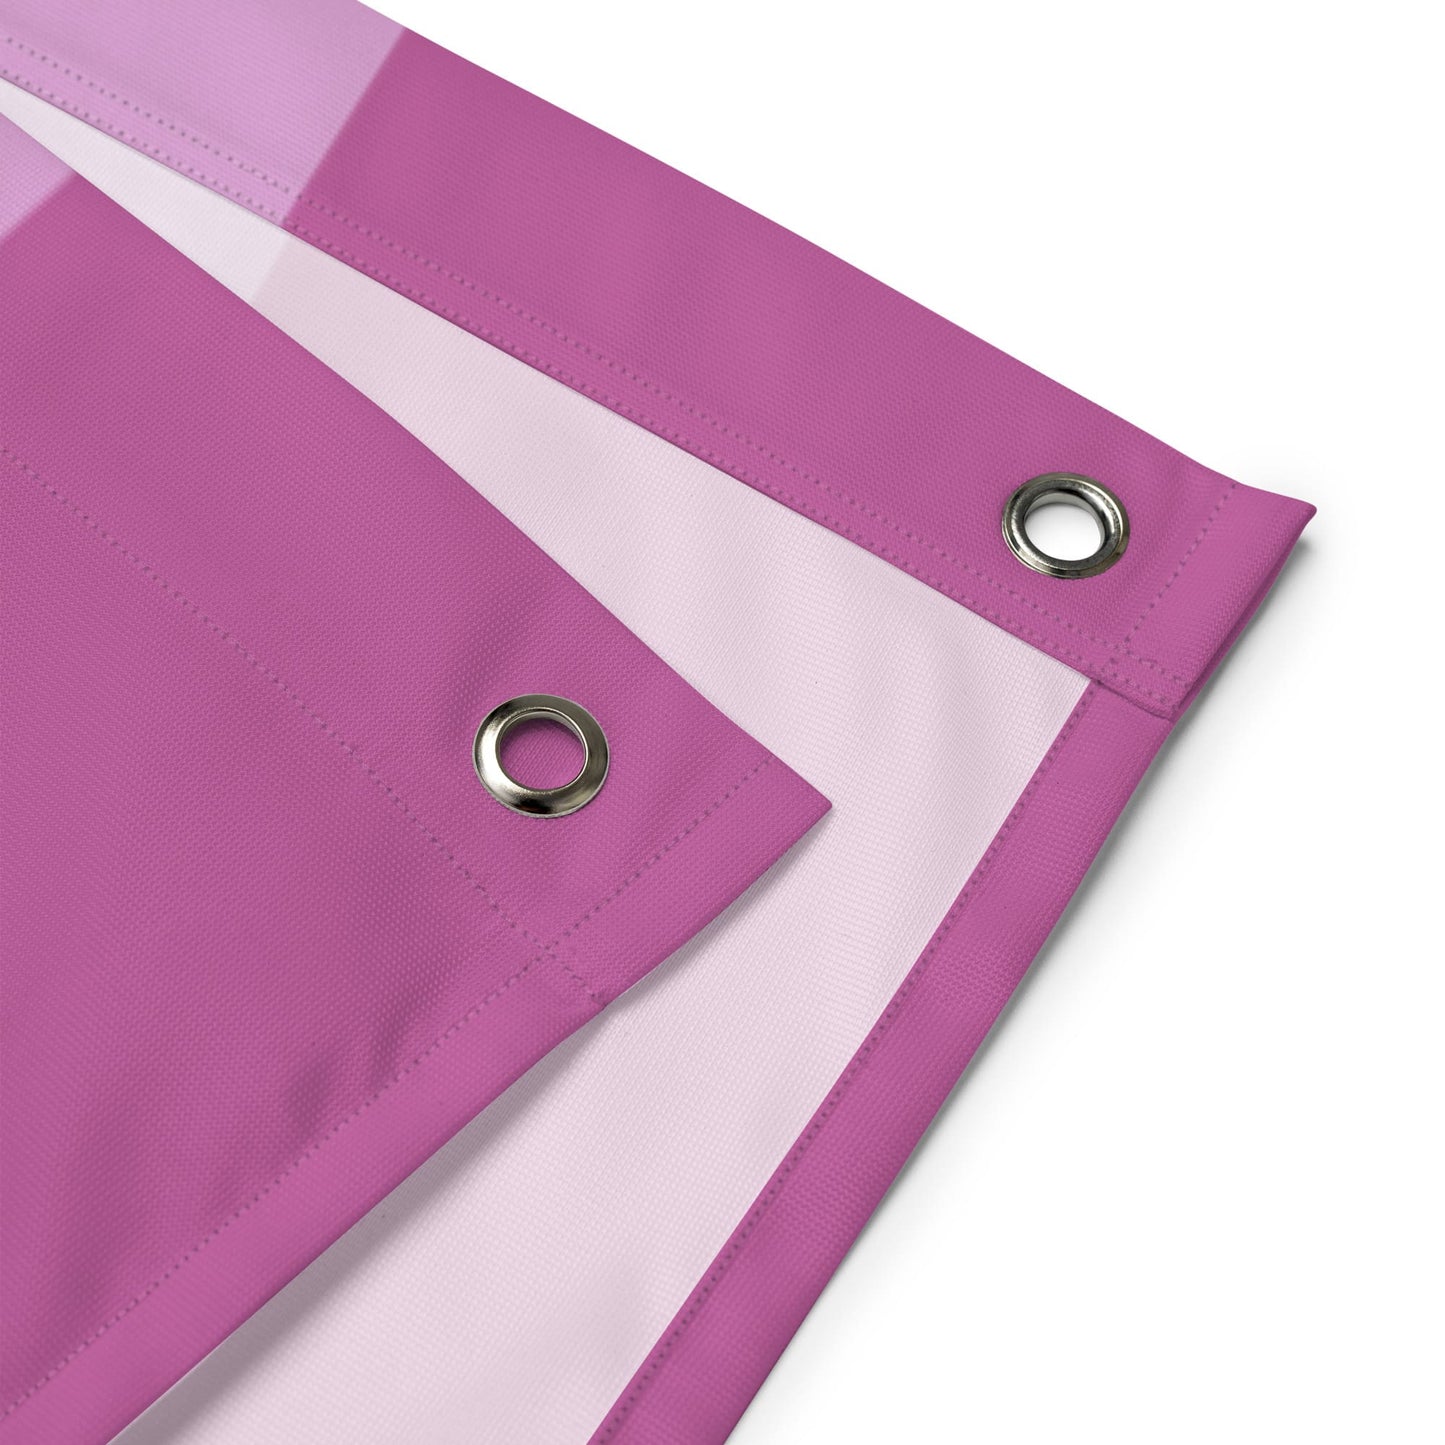 Femboy flag wall tapestry, detail grommets